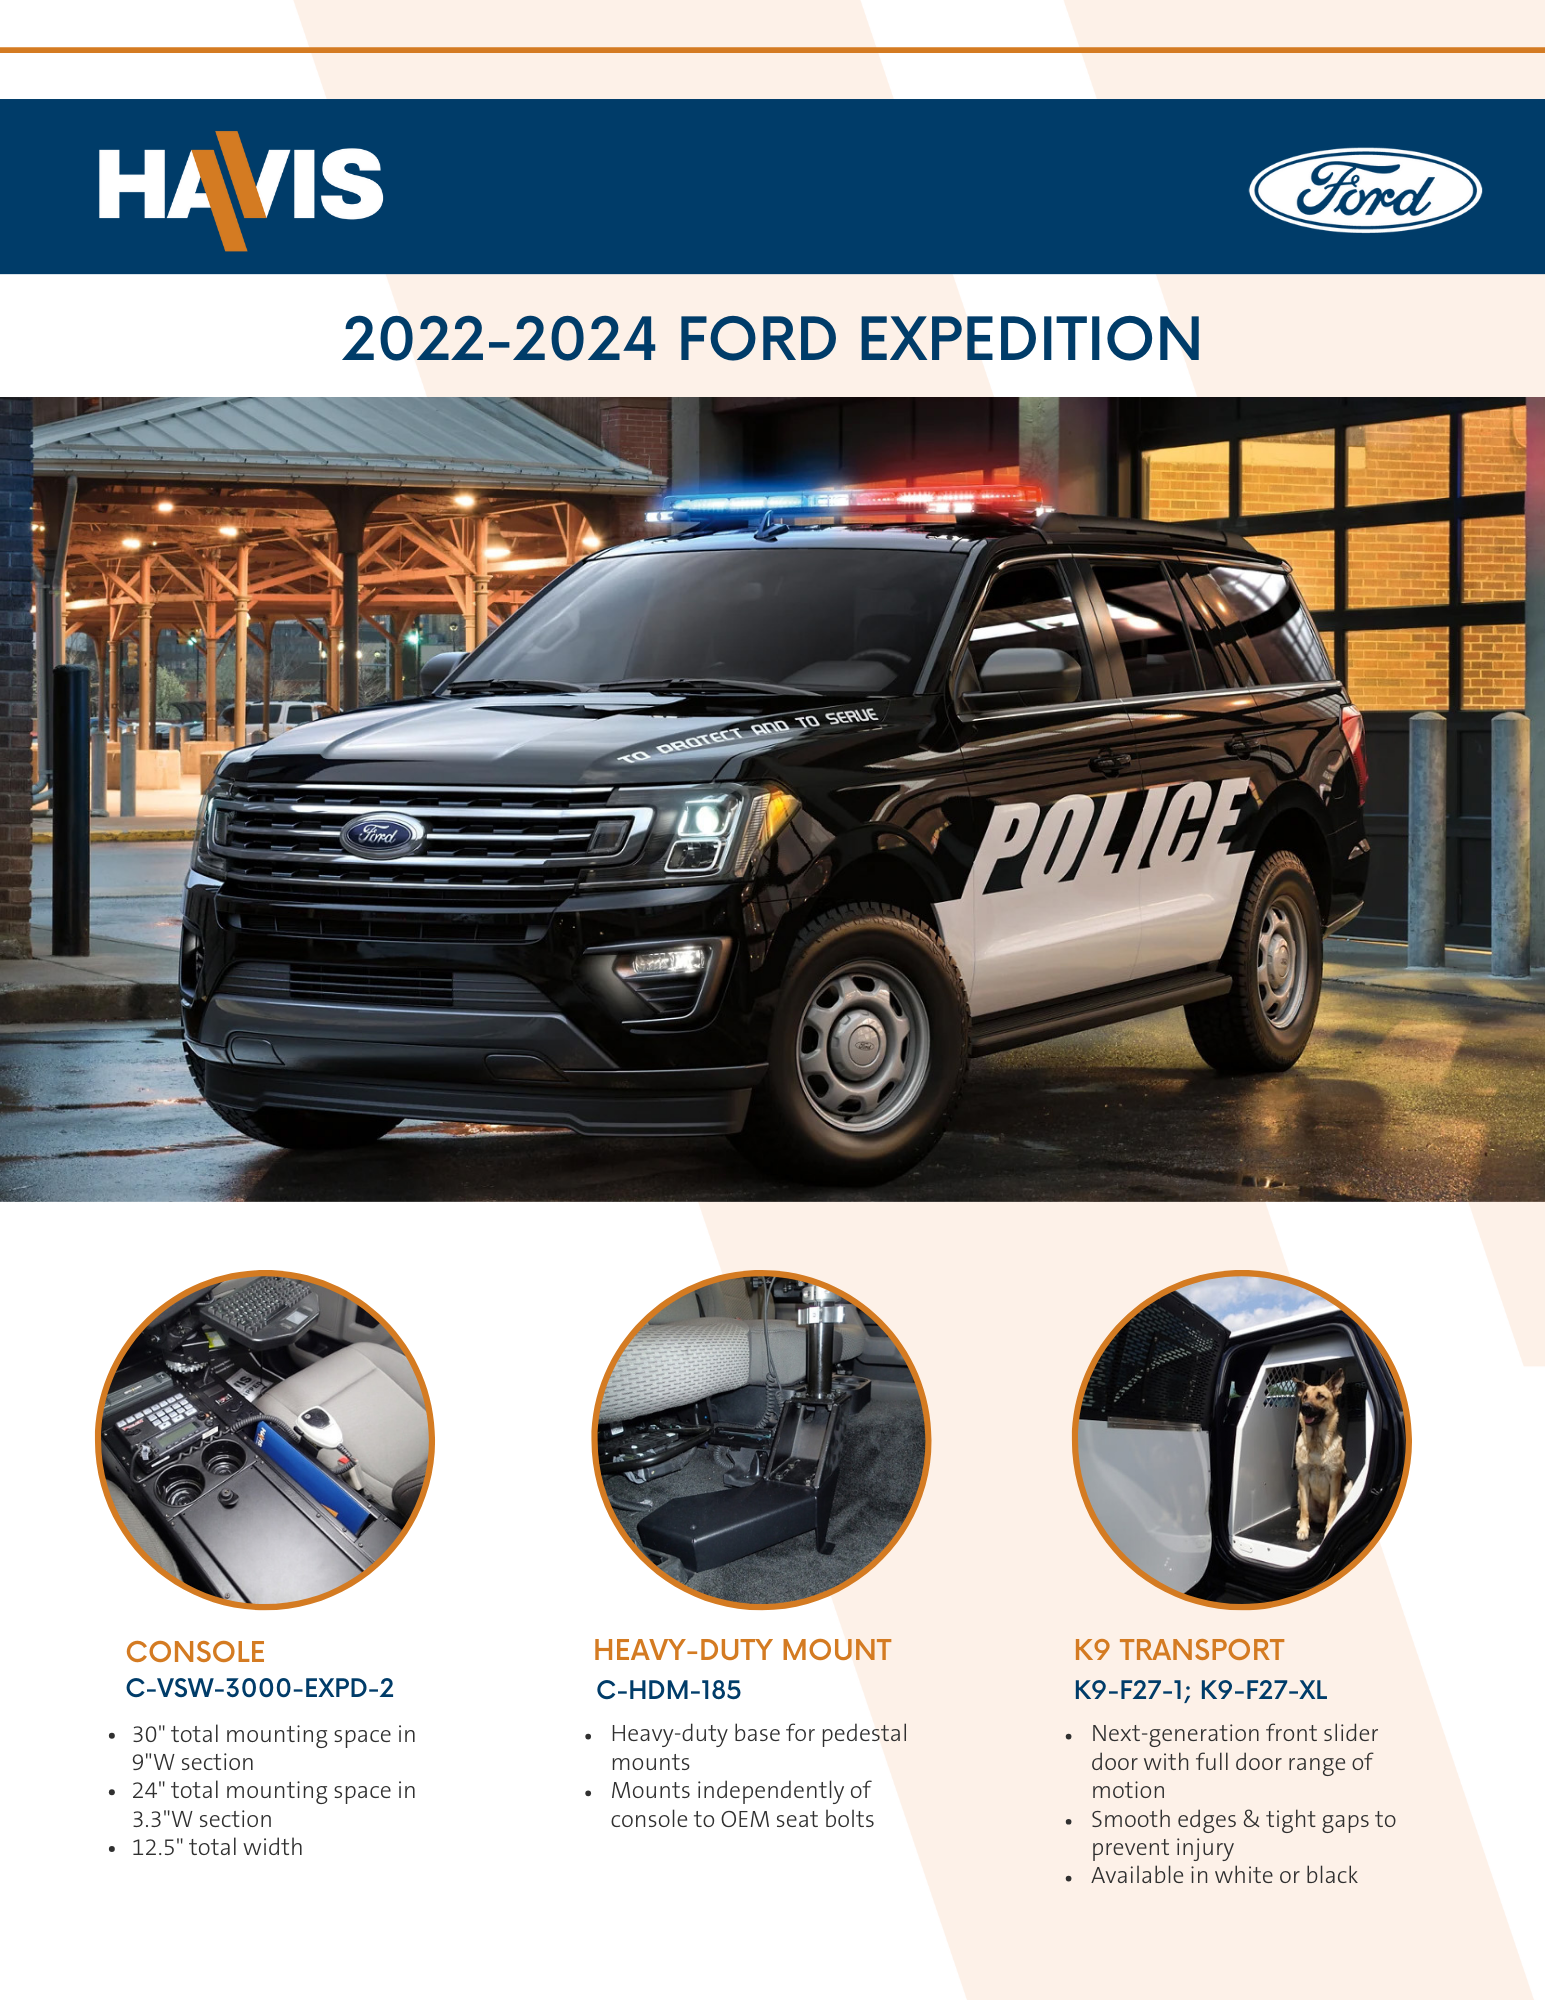 2022-2024 Ford Expedition Teaser Sheet